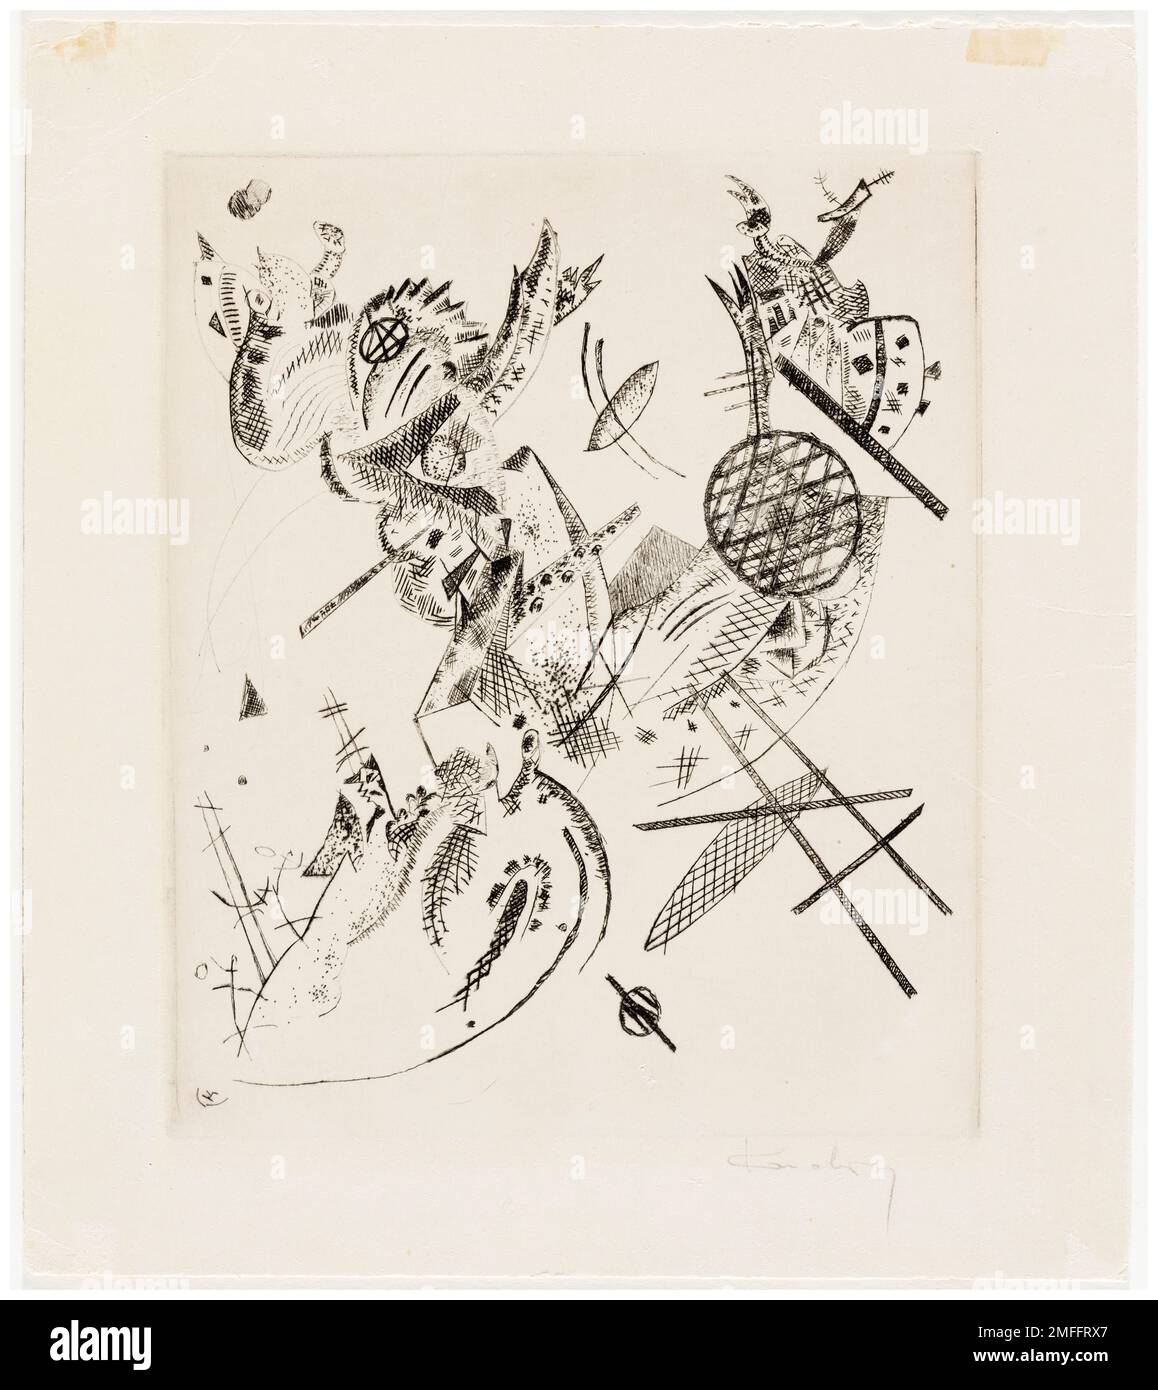 Wassily Kandinsky, kleine Welten XII (Small Worlds XII), Abstract drawing, 1922 Stockfoto